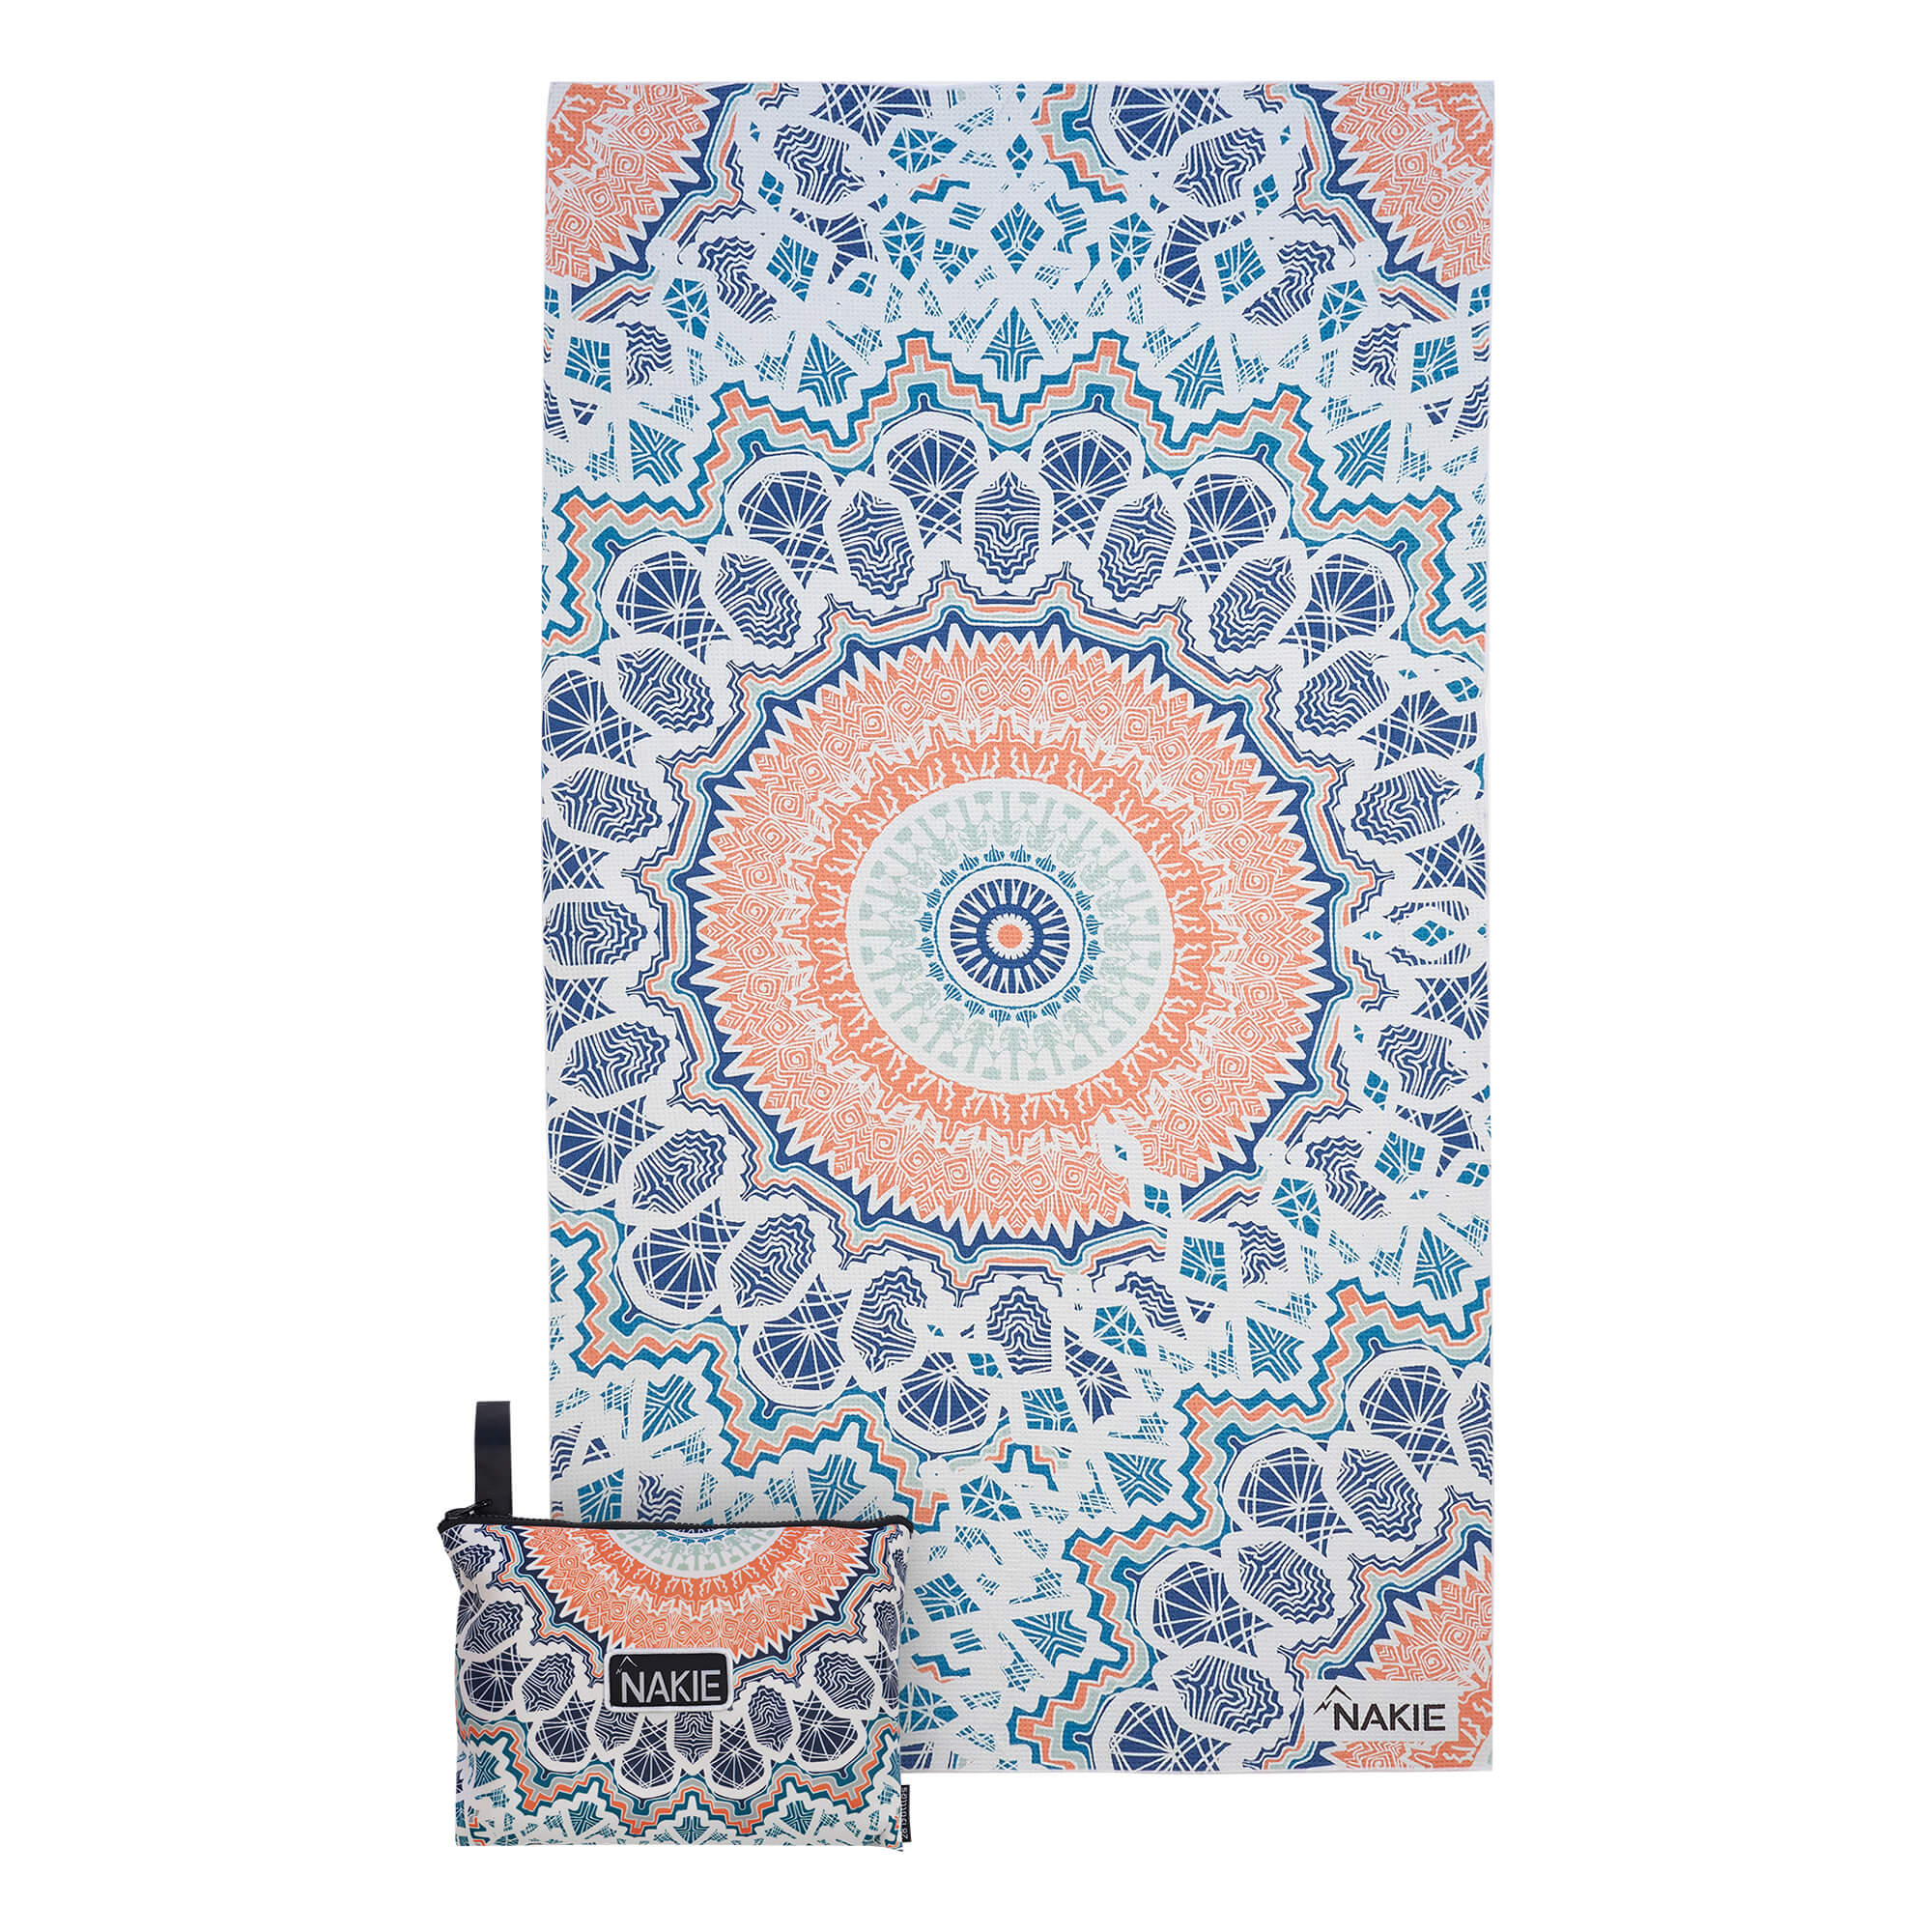 Sound of Summer - Recycled Sand Free Beach Towel